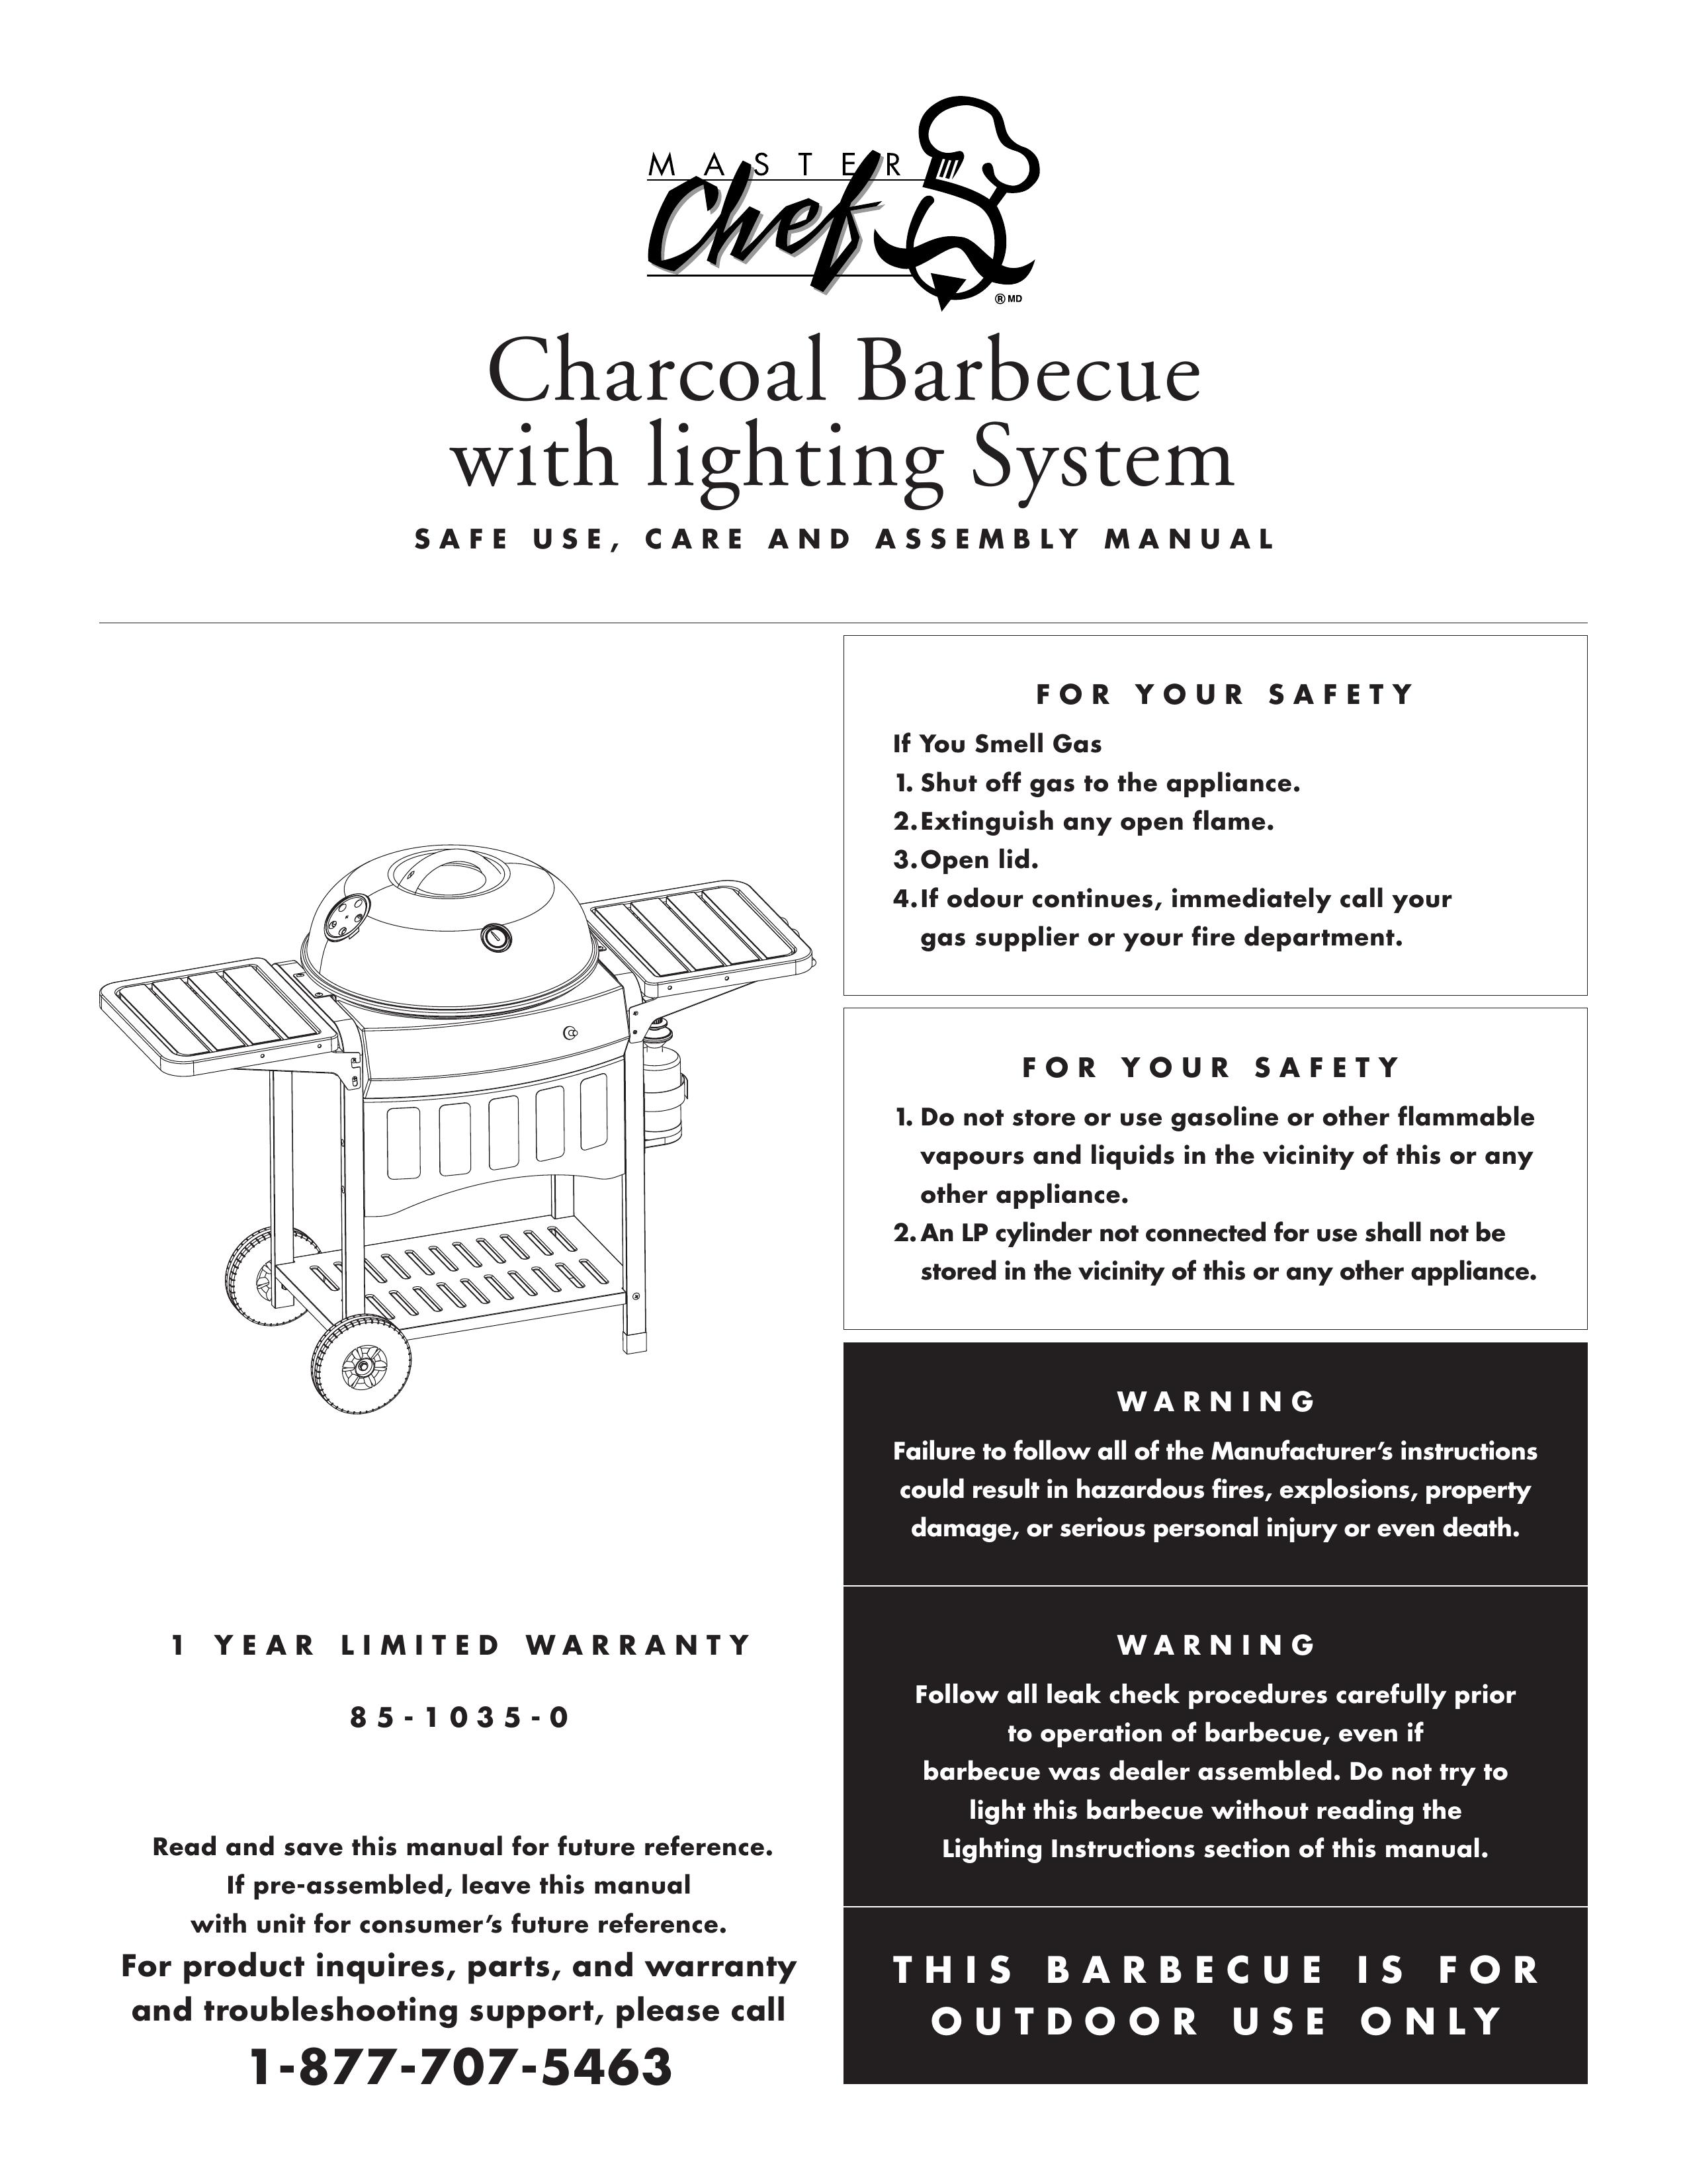 Master Chef Big Gas1 Charcoal Grill User Manual